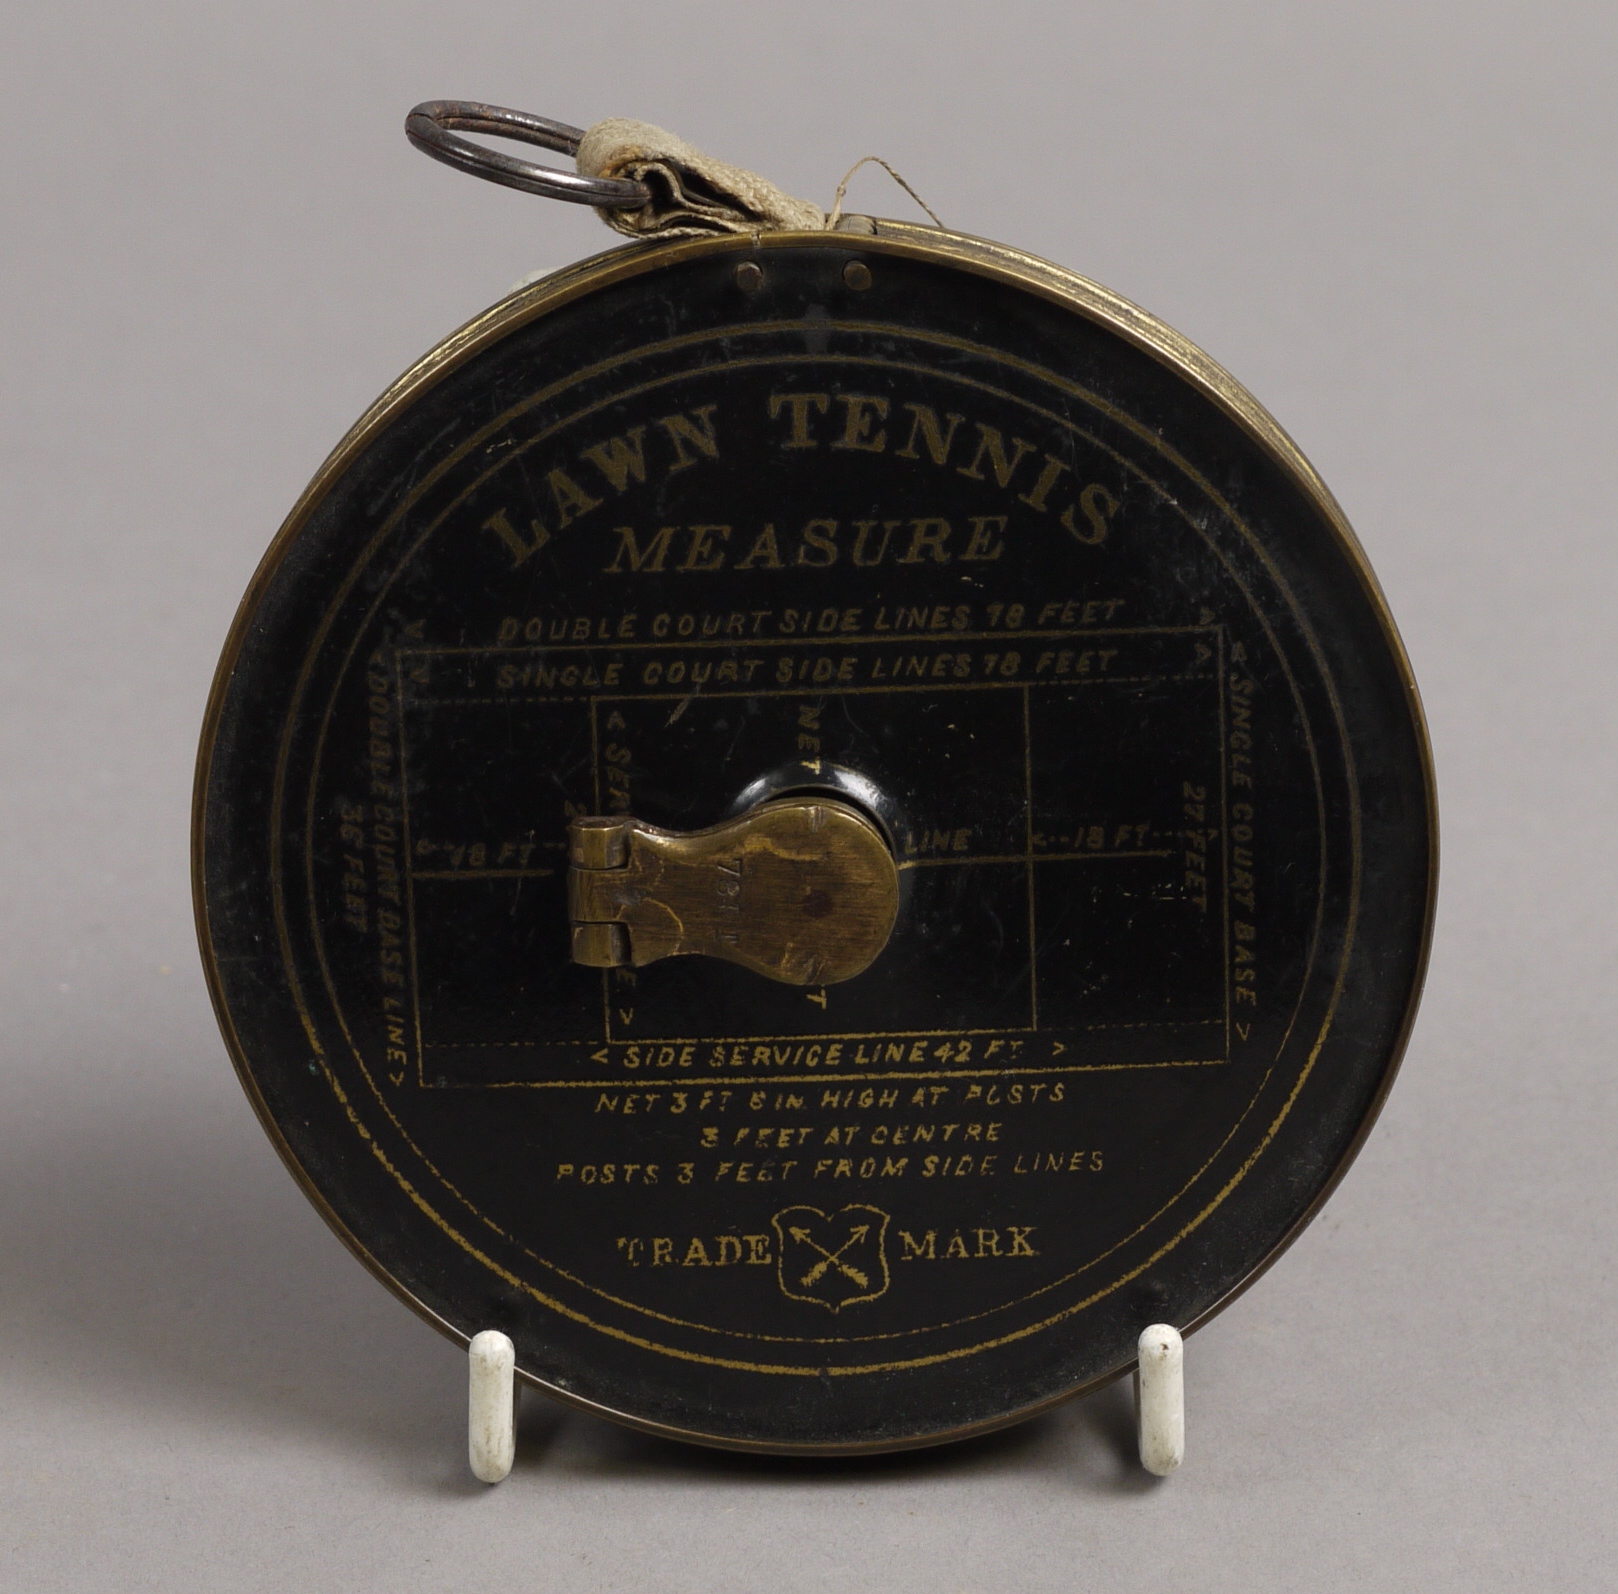 AN EARLY 20TH CENTURY BRASS CASED LAWN TENNIS MEASURE, the face enamelled in black with gilt